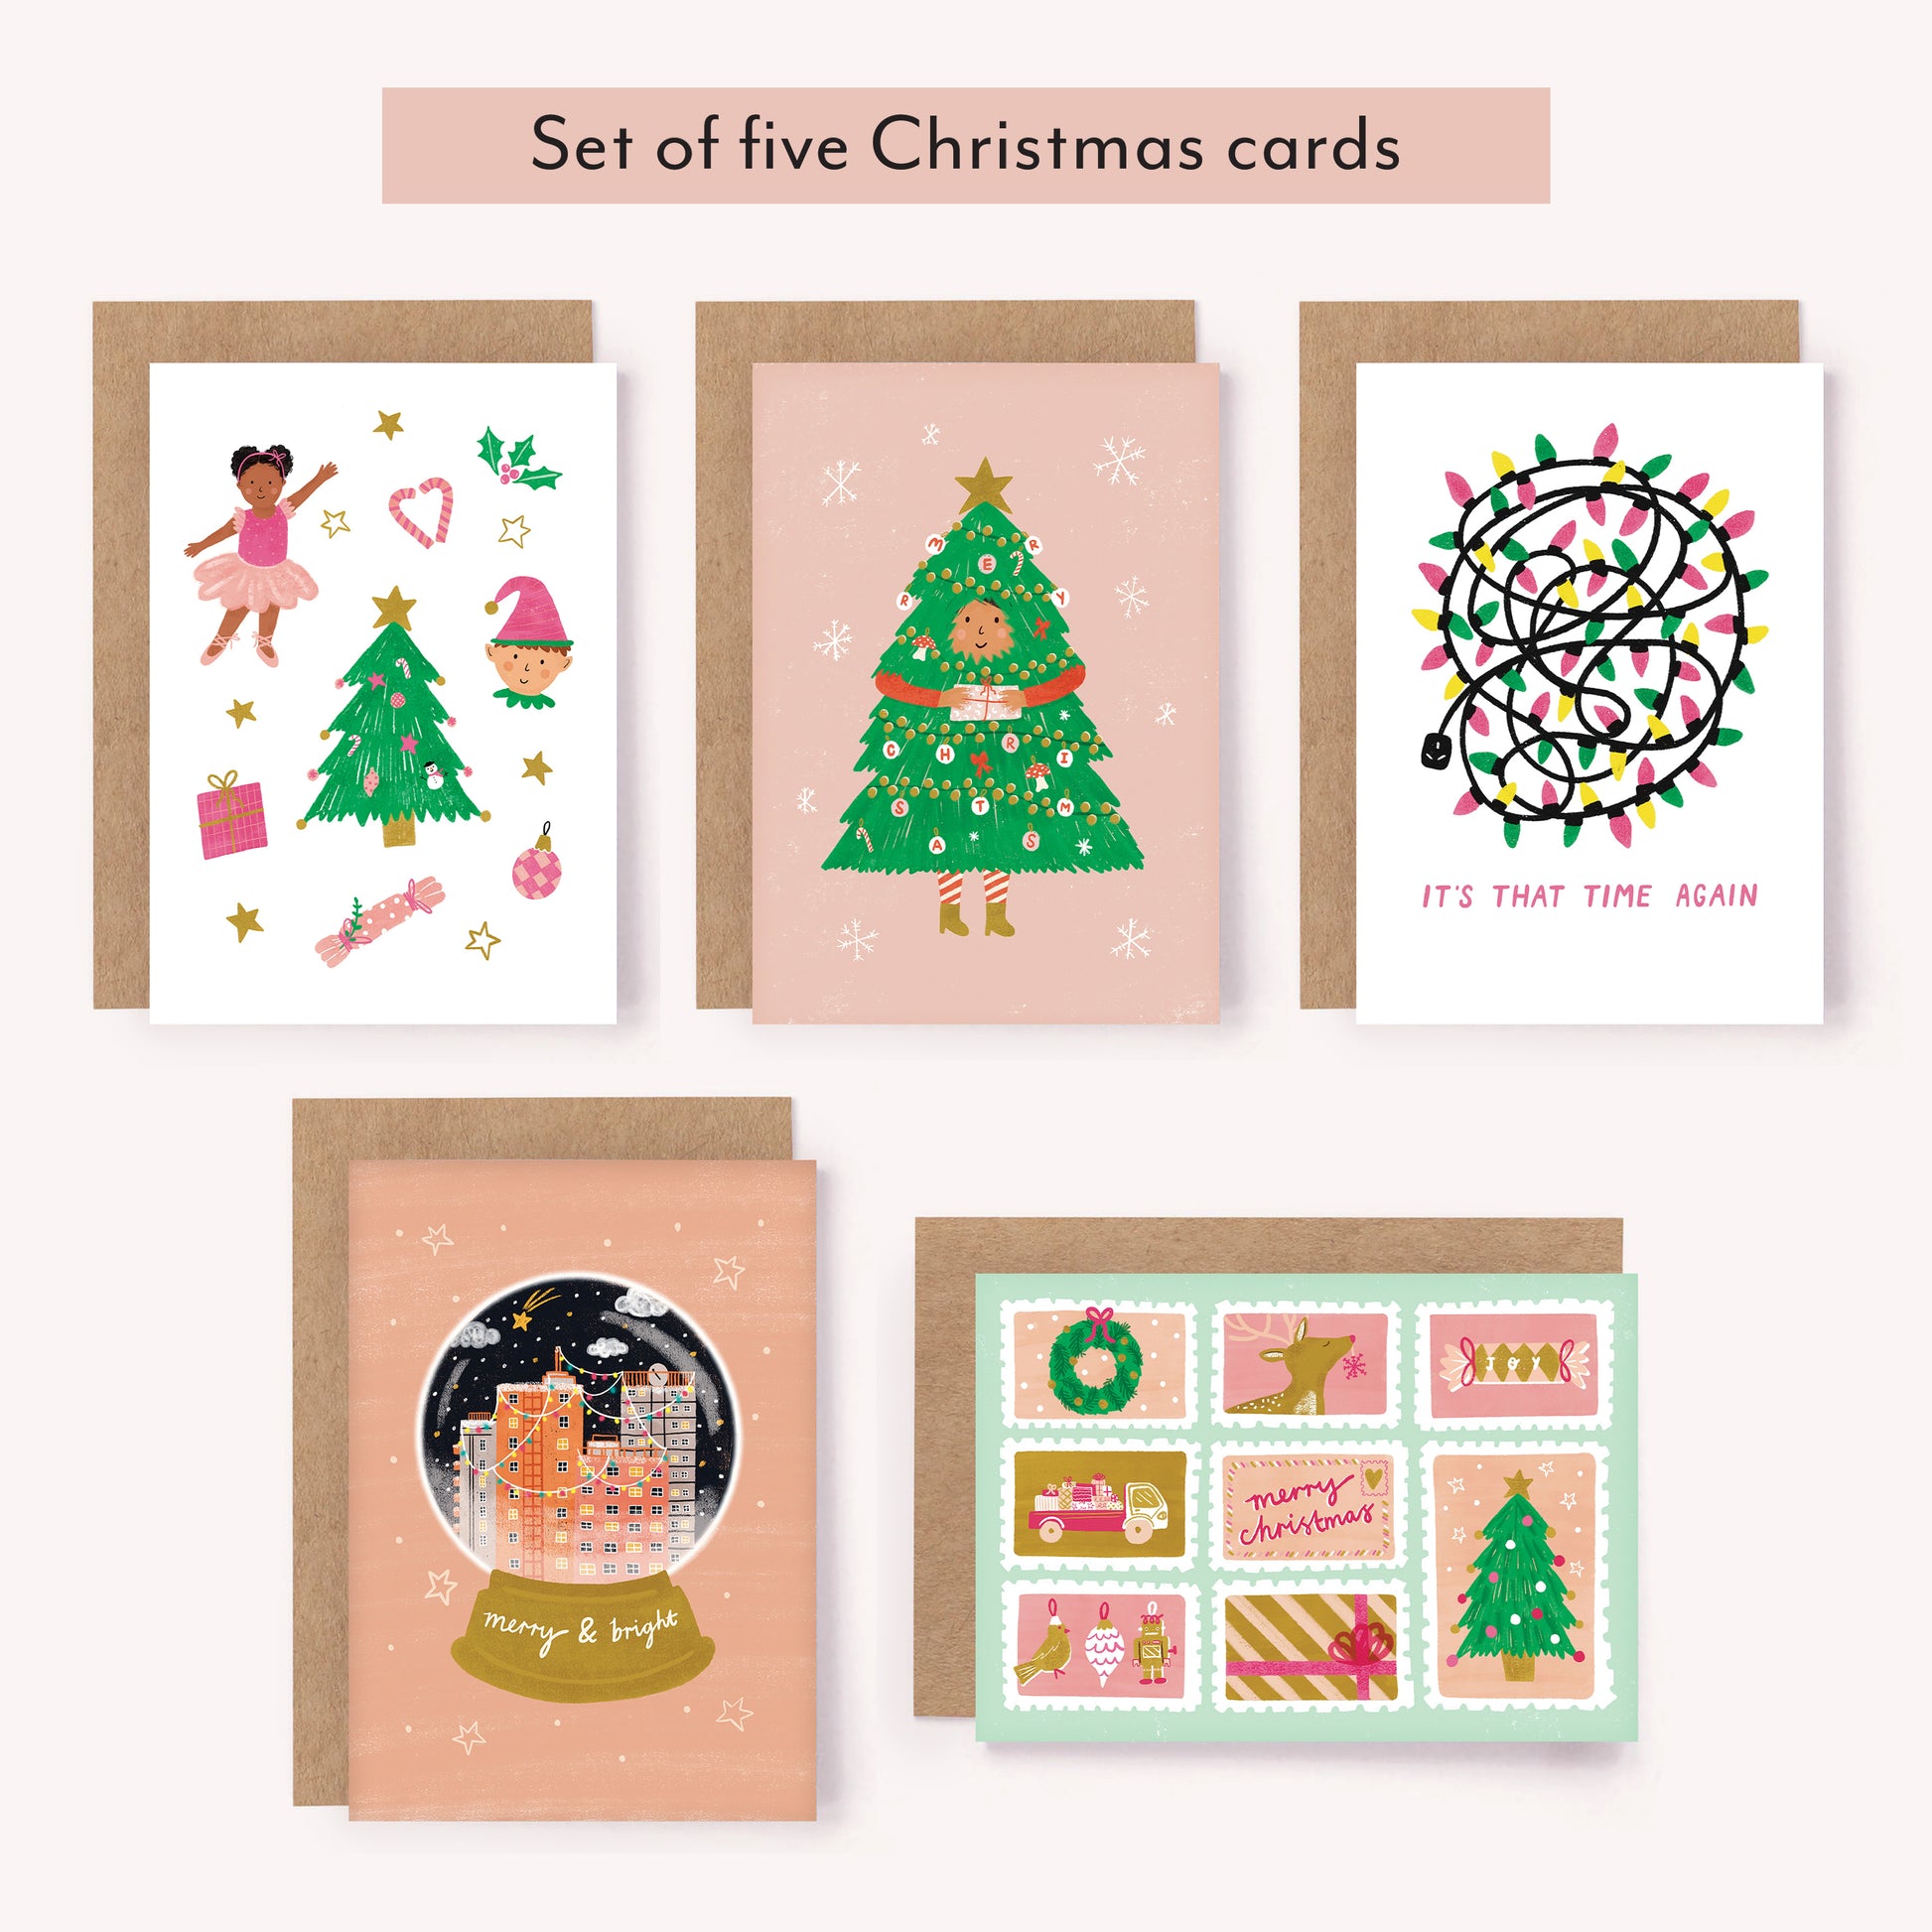 Spread joy with our unique, illustrated Christmas cards! This packaged set includes 5 x different designs with accompanying envelopes. They are all blank inside for a personal message. You'll save money when you buy this bundle :)